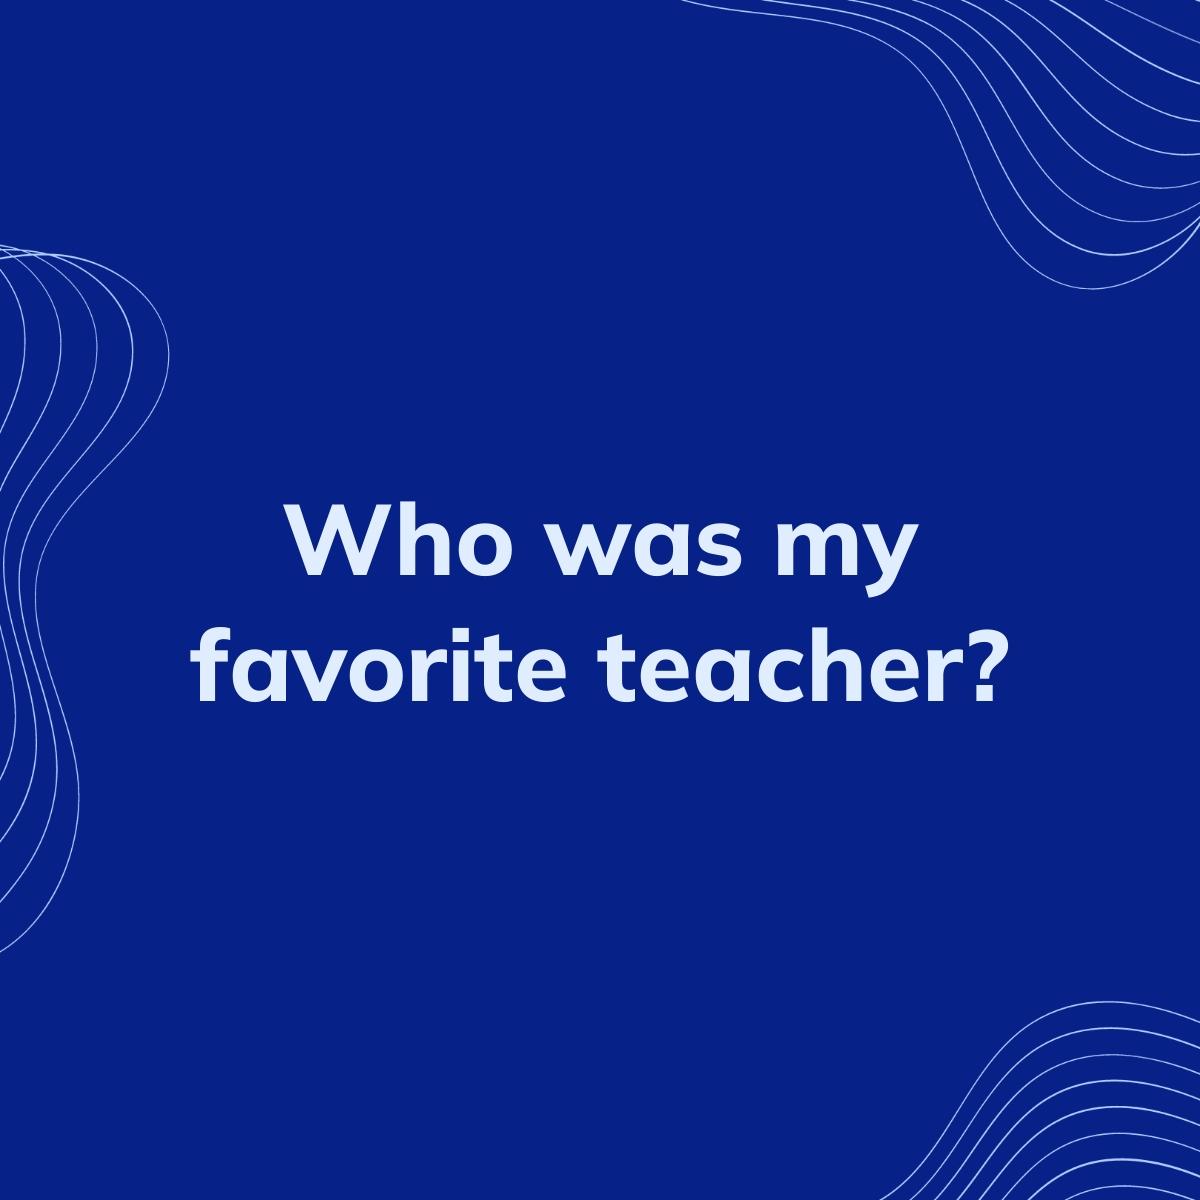 Journal Prompt: Who was my favorite teacher?